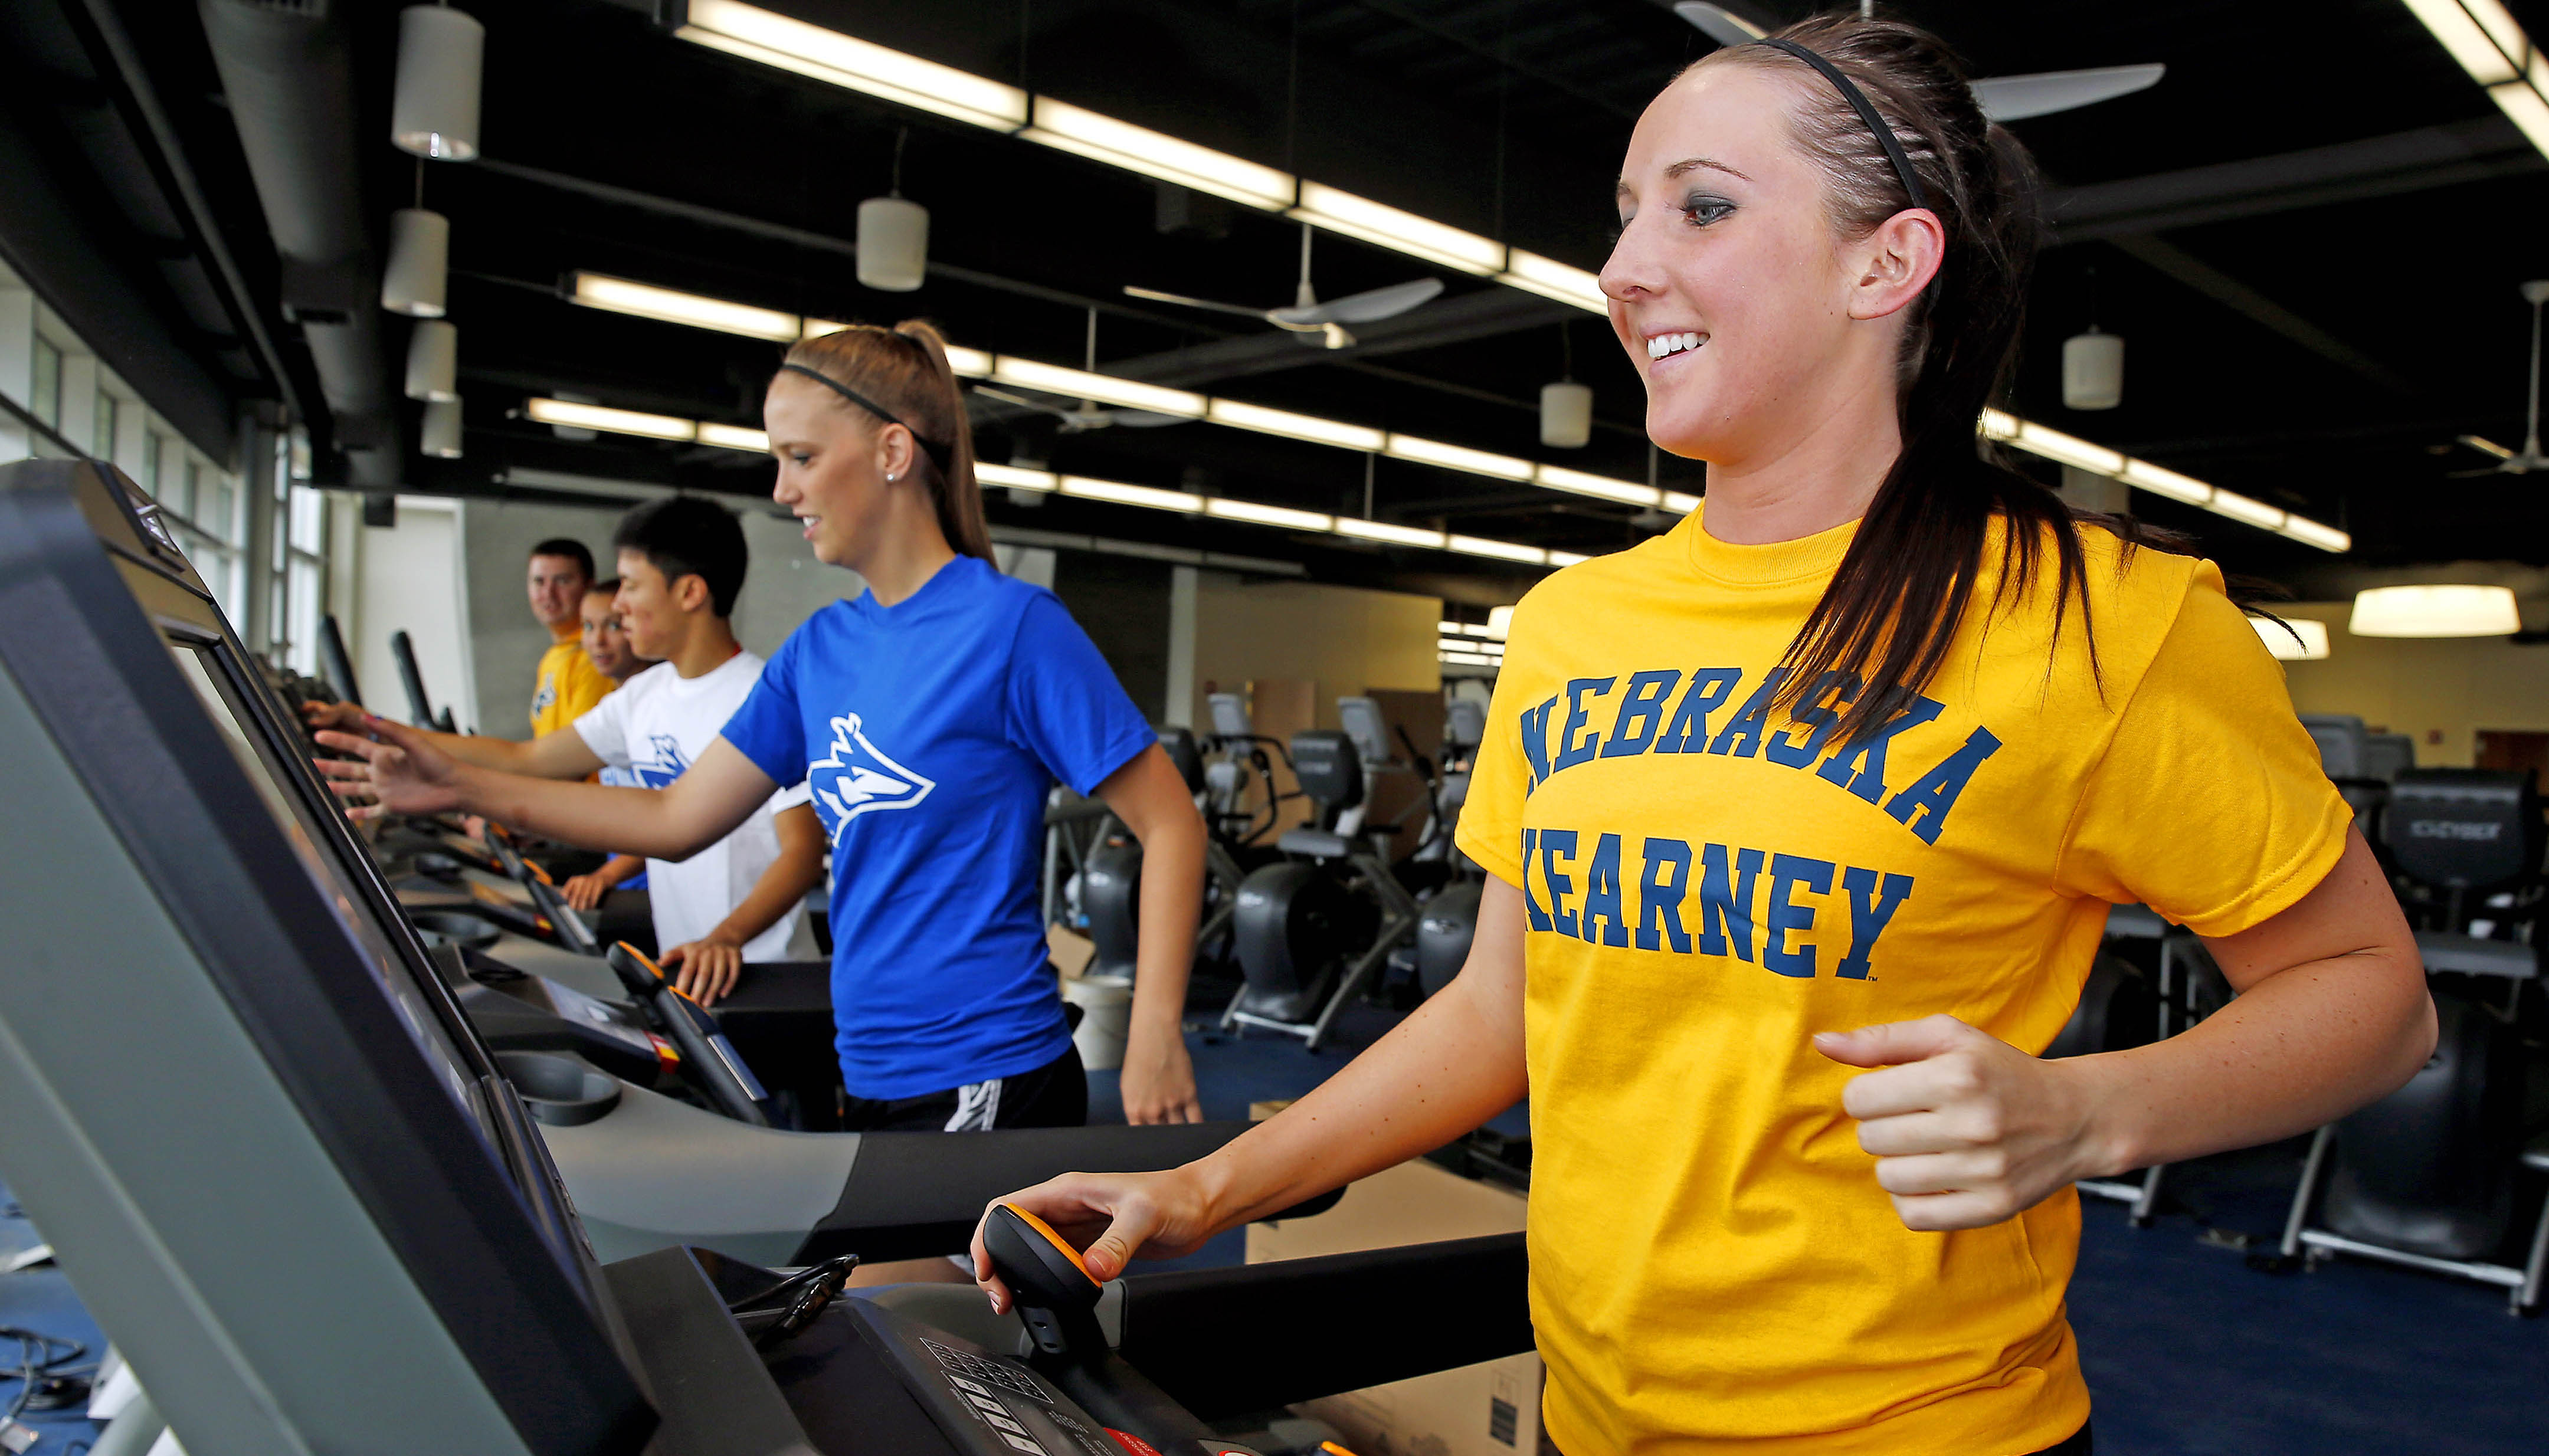 UNK student Sierra Welsh works out in the new campus Wellness Center, which opens to students Aug. 1. The $6.5 million project features a new student fitness center, classrooms, physical activity and wellness lab, and public health research and community outreach space. 